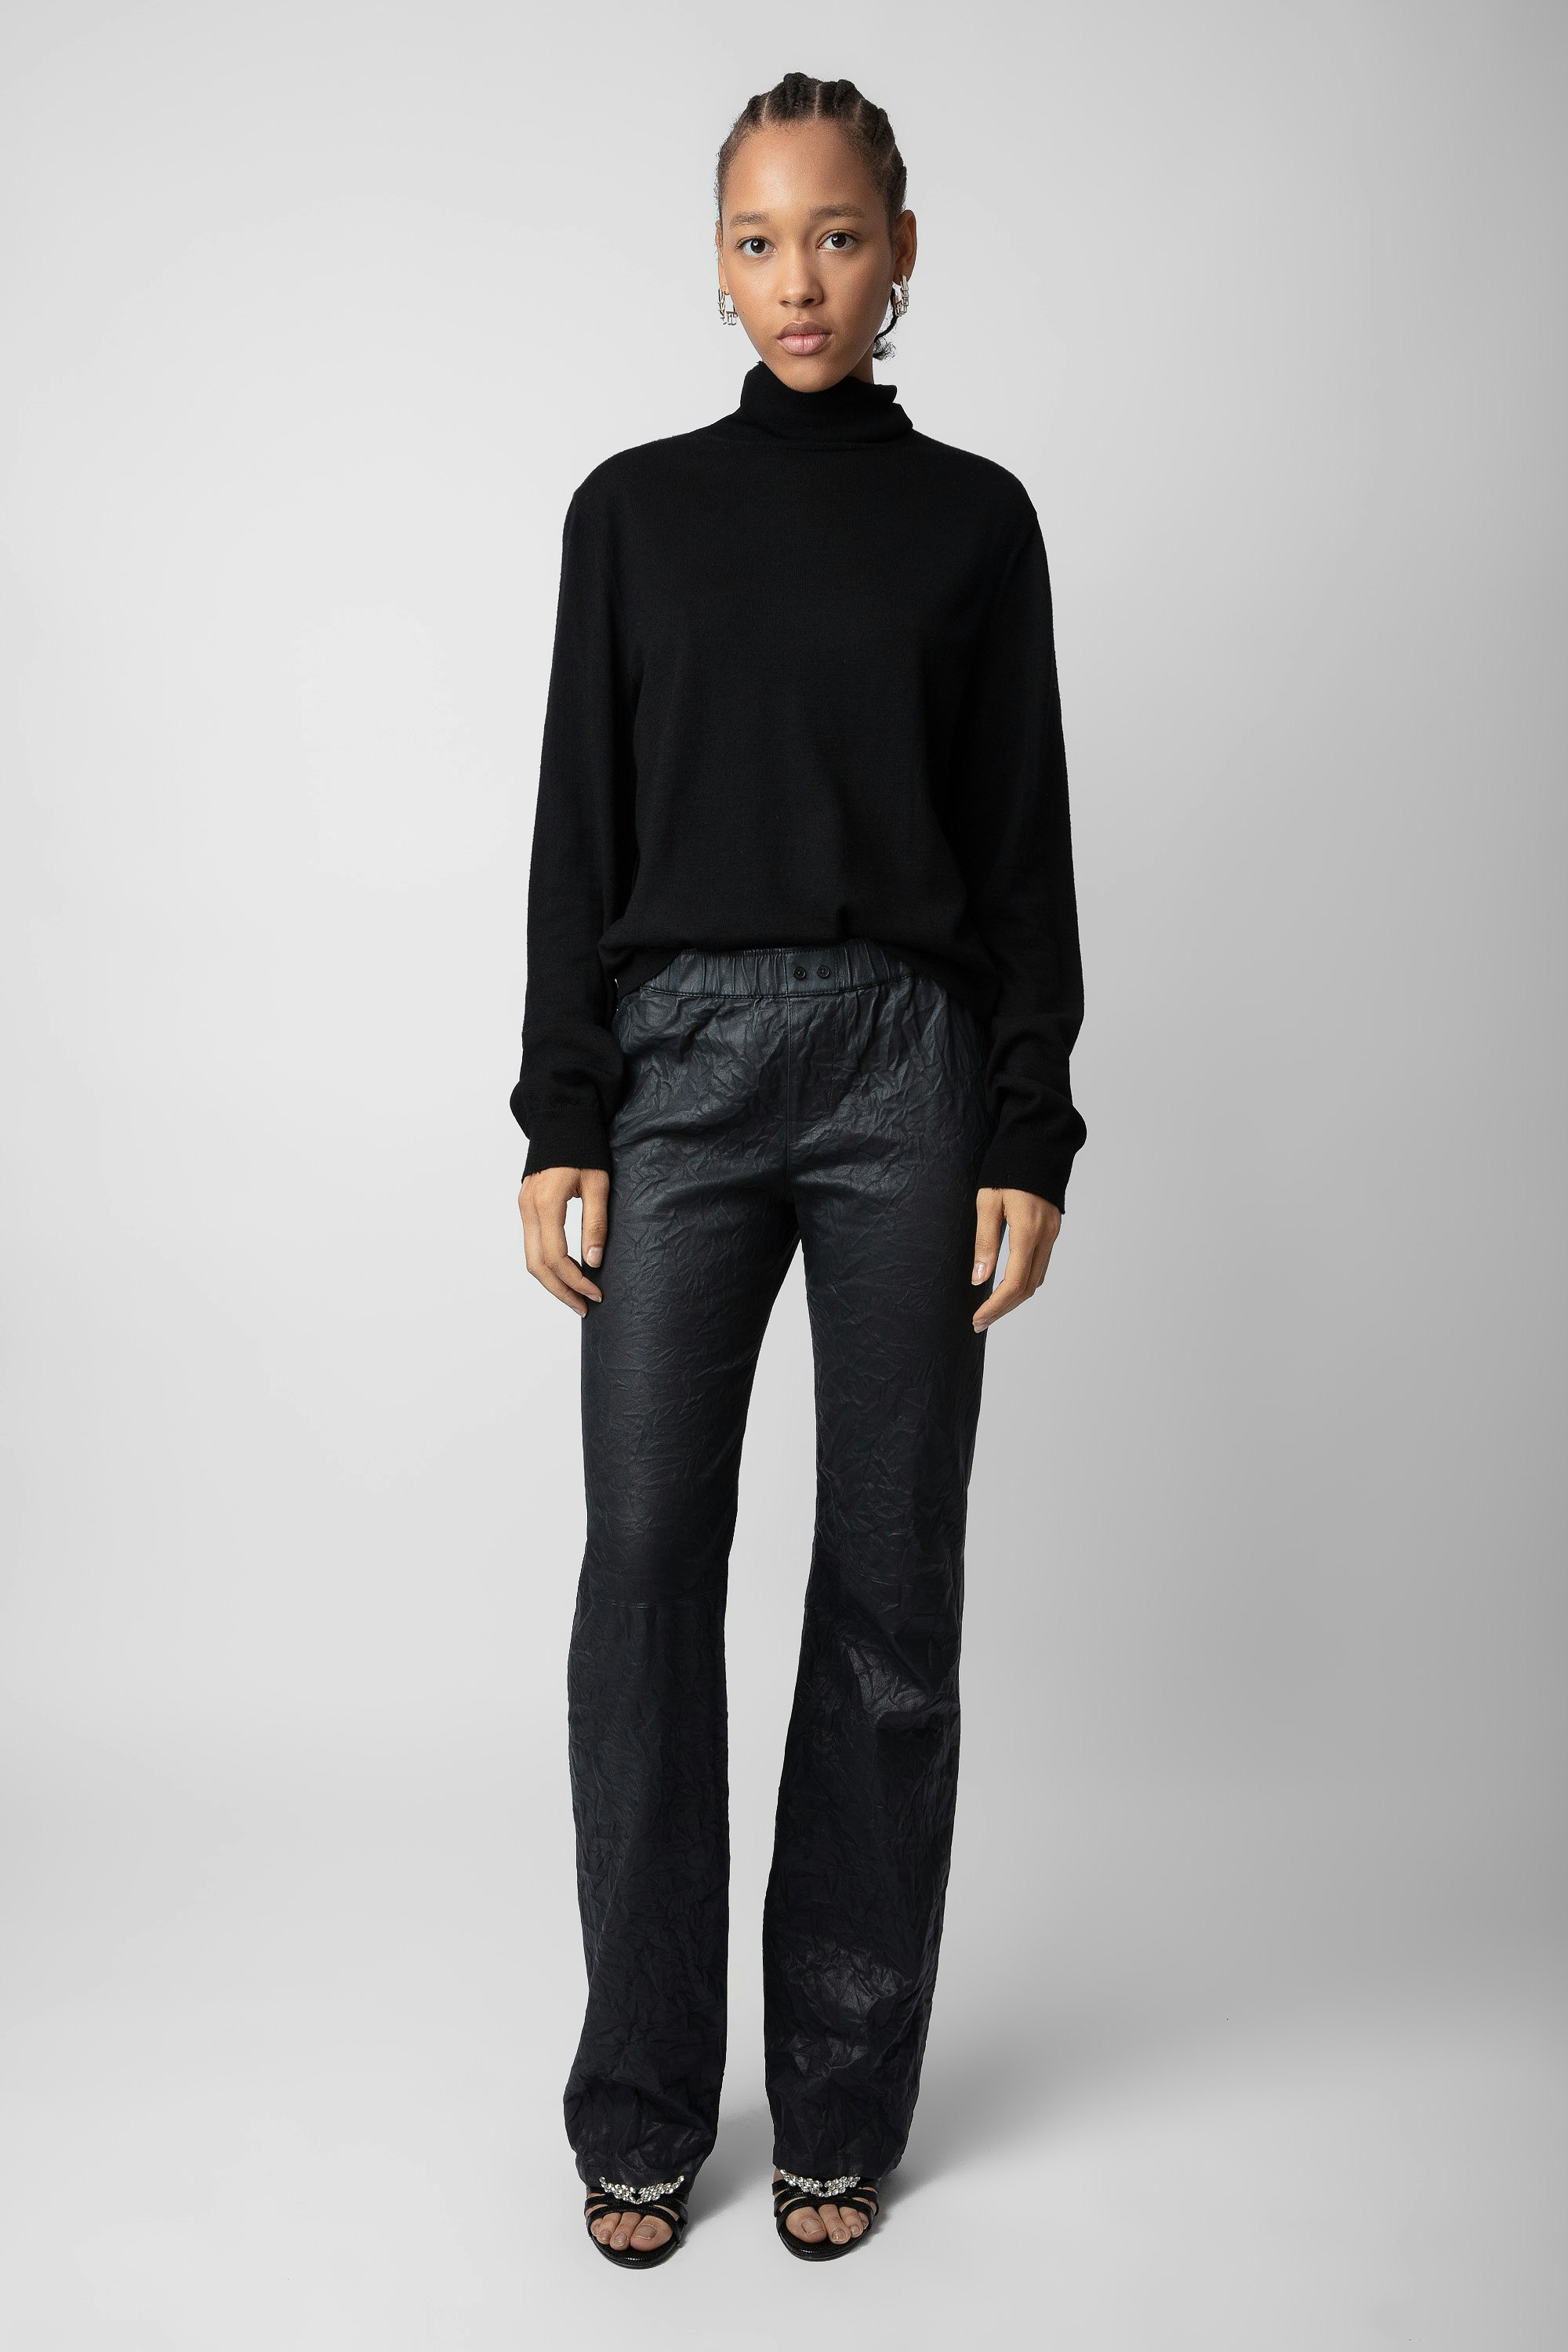 Pauline Crinkled Leather Trousers - Women’s anthracite crinkled leather trousers.